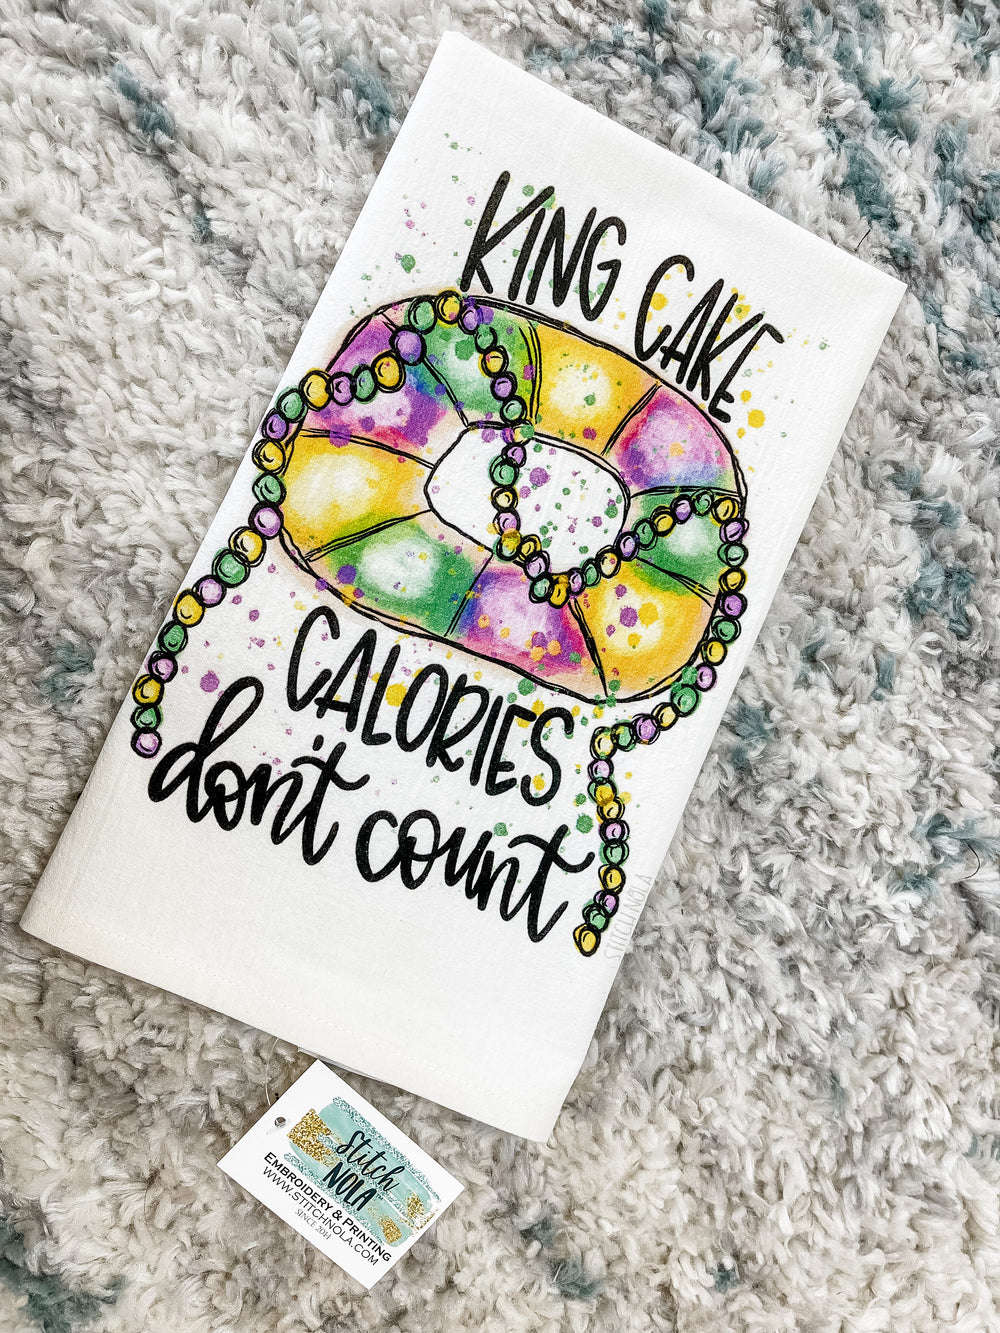 King Cake Calories Don't Count Towel